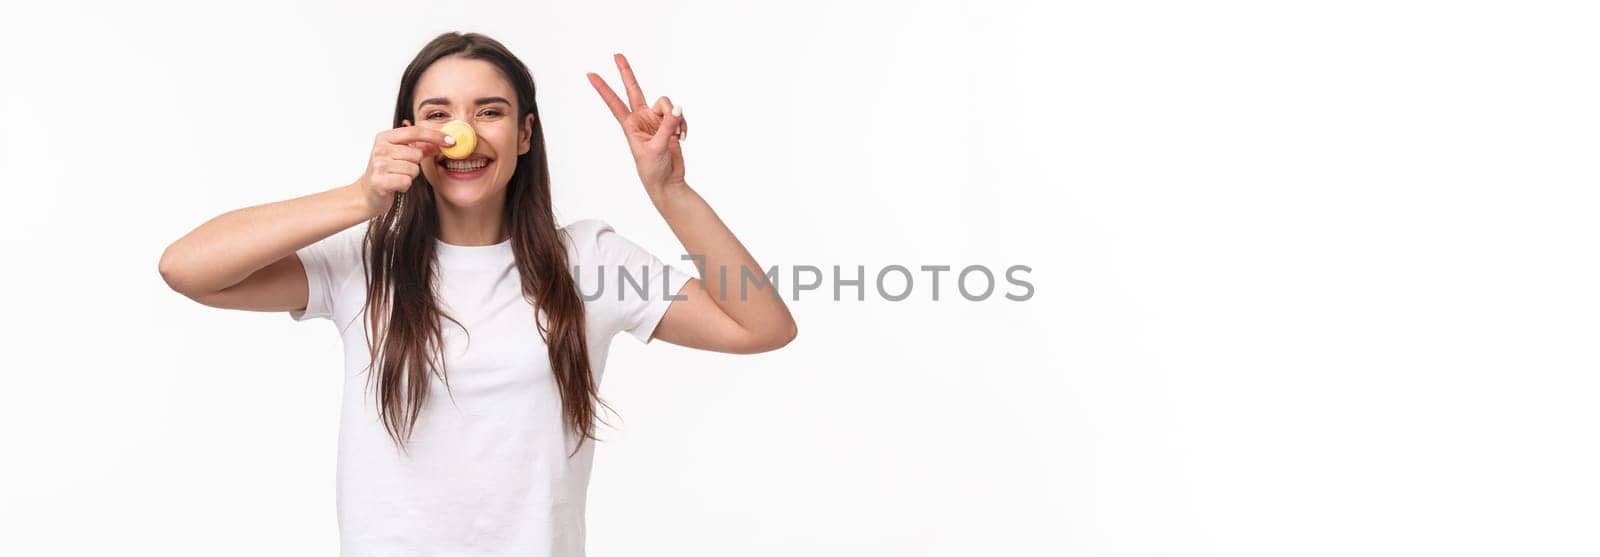 Portrait of positive, cheerful young girl eating sweets, holding macaron over nose, make peace sign, look kawaii and silly, laughing joyful, visit favorite dessert cafe, white background.